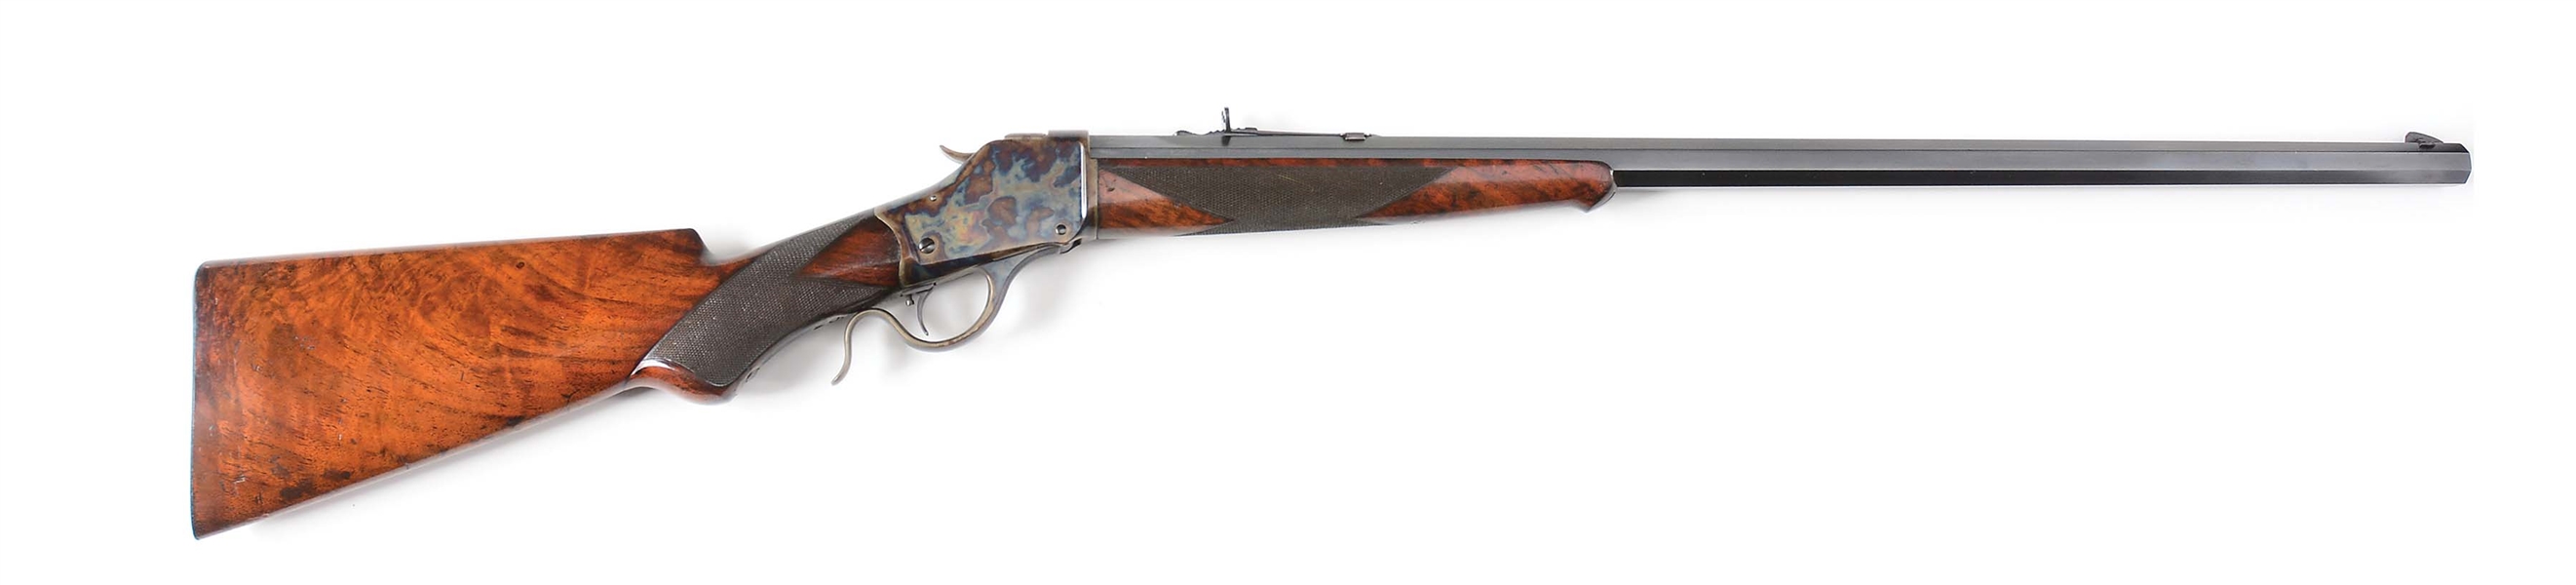 (A) WINCHESTER DELUXE HI-WALL SINGLE SHOT RIFLE (1889).